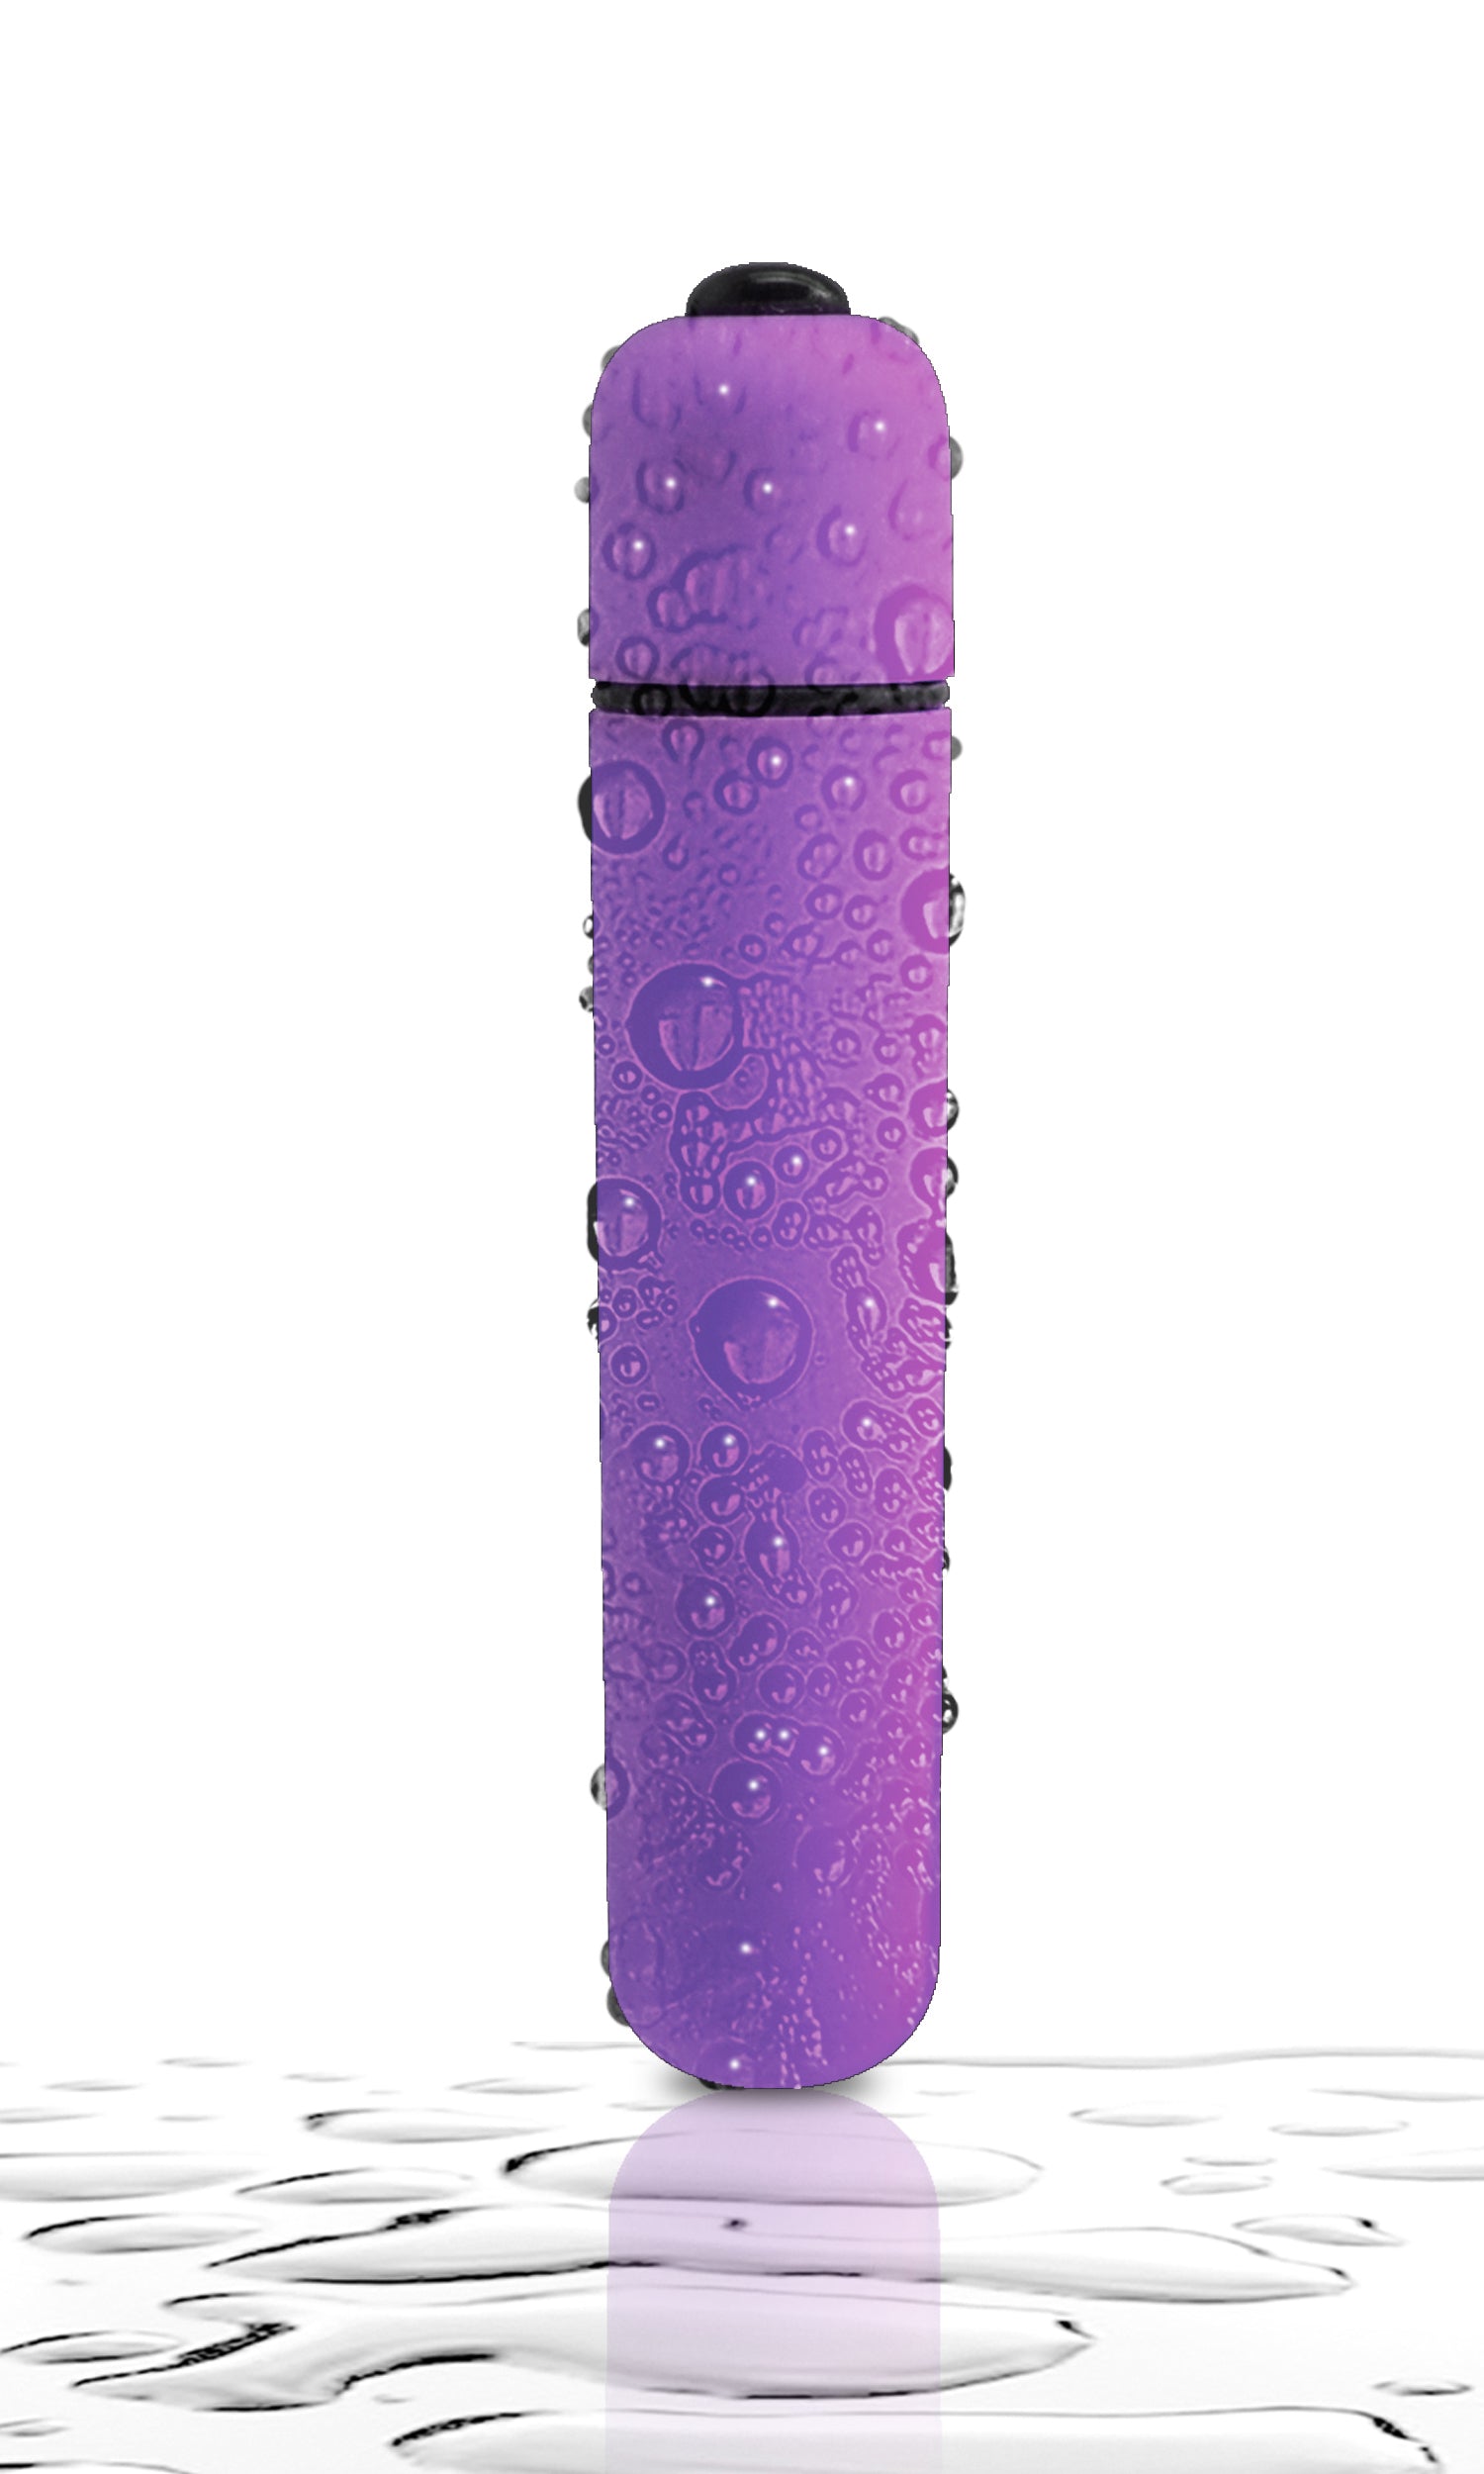 Neon Luv Touch Bullet XL for Blissful, Discreet Pleasure